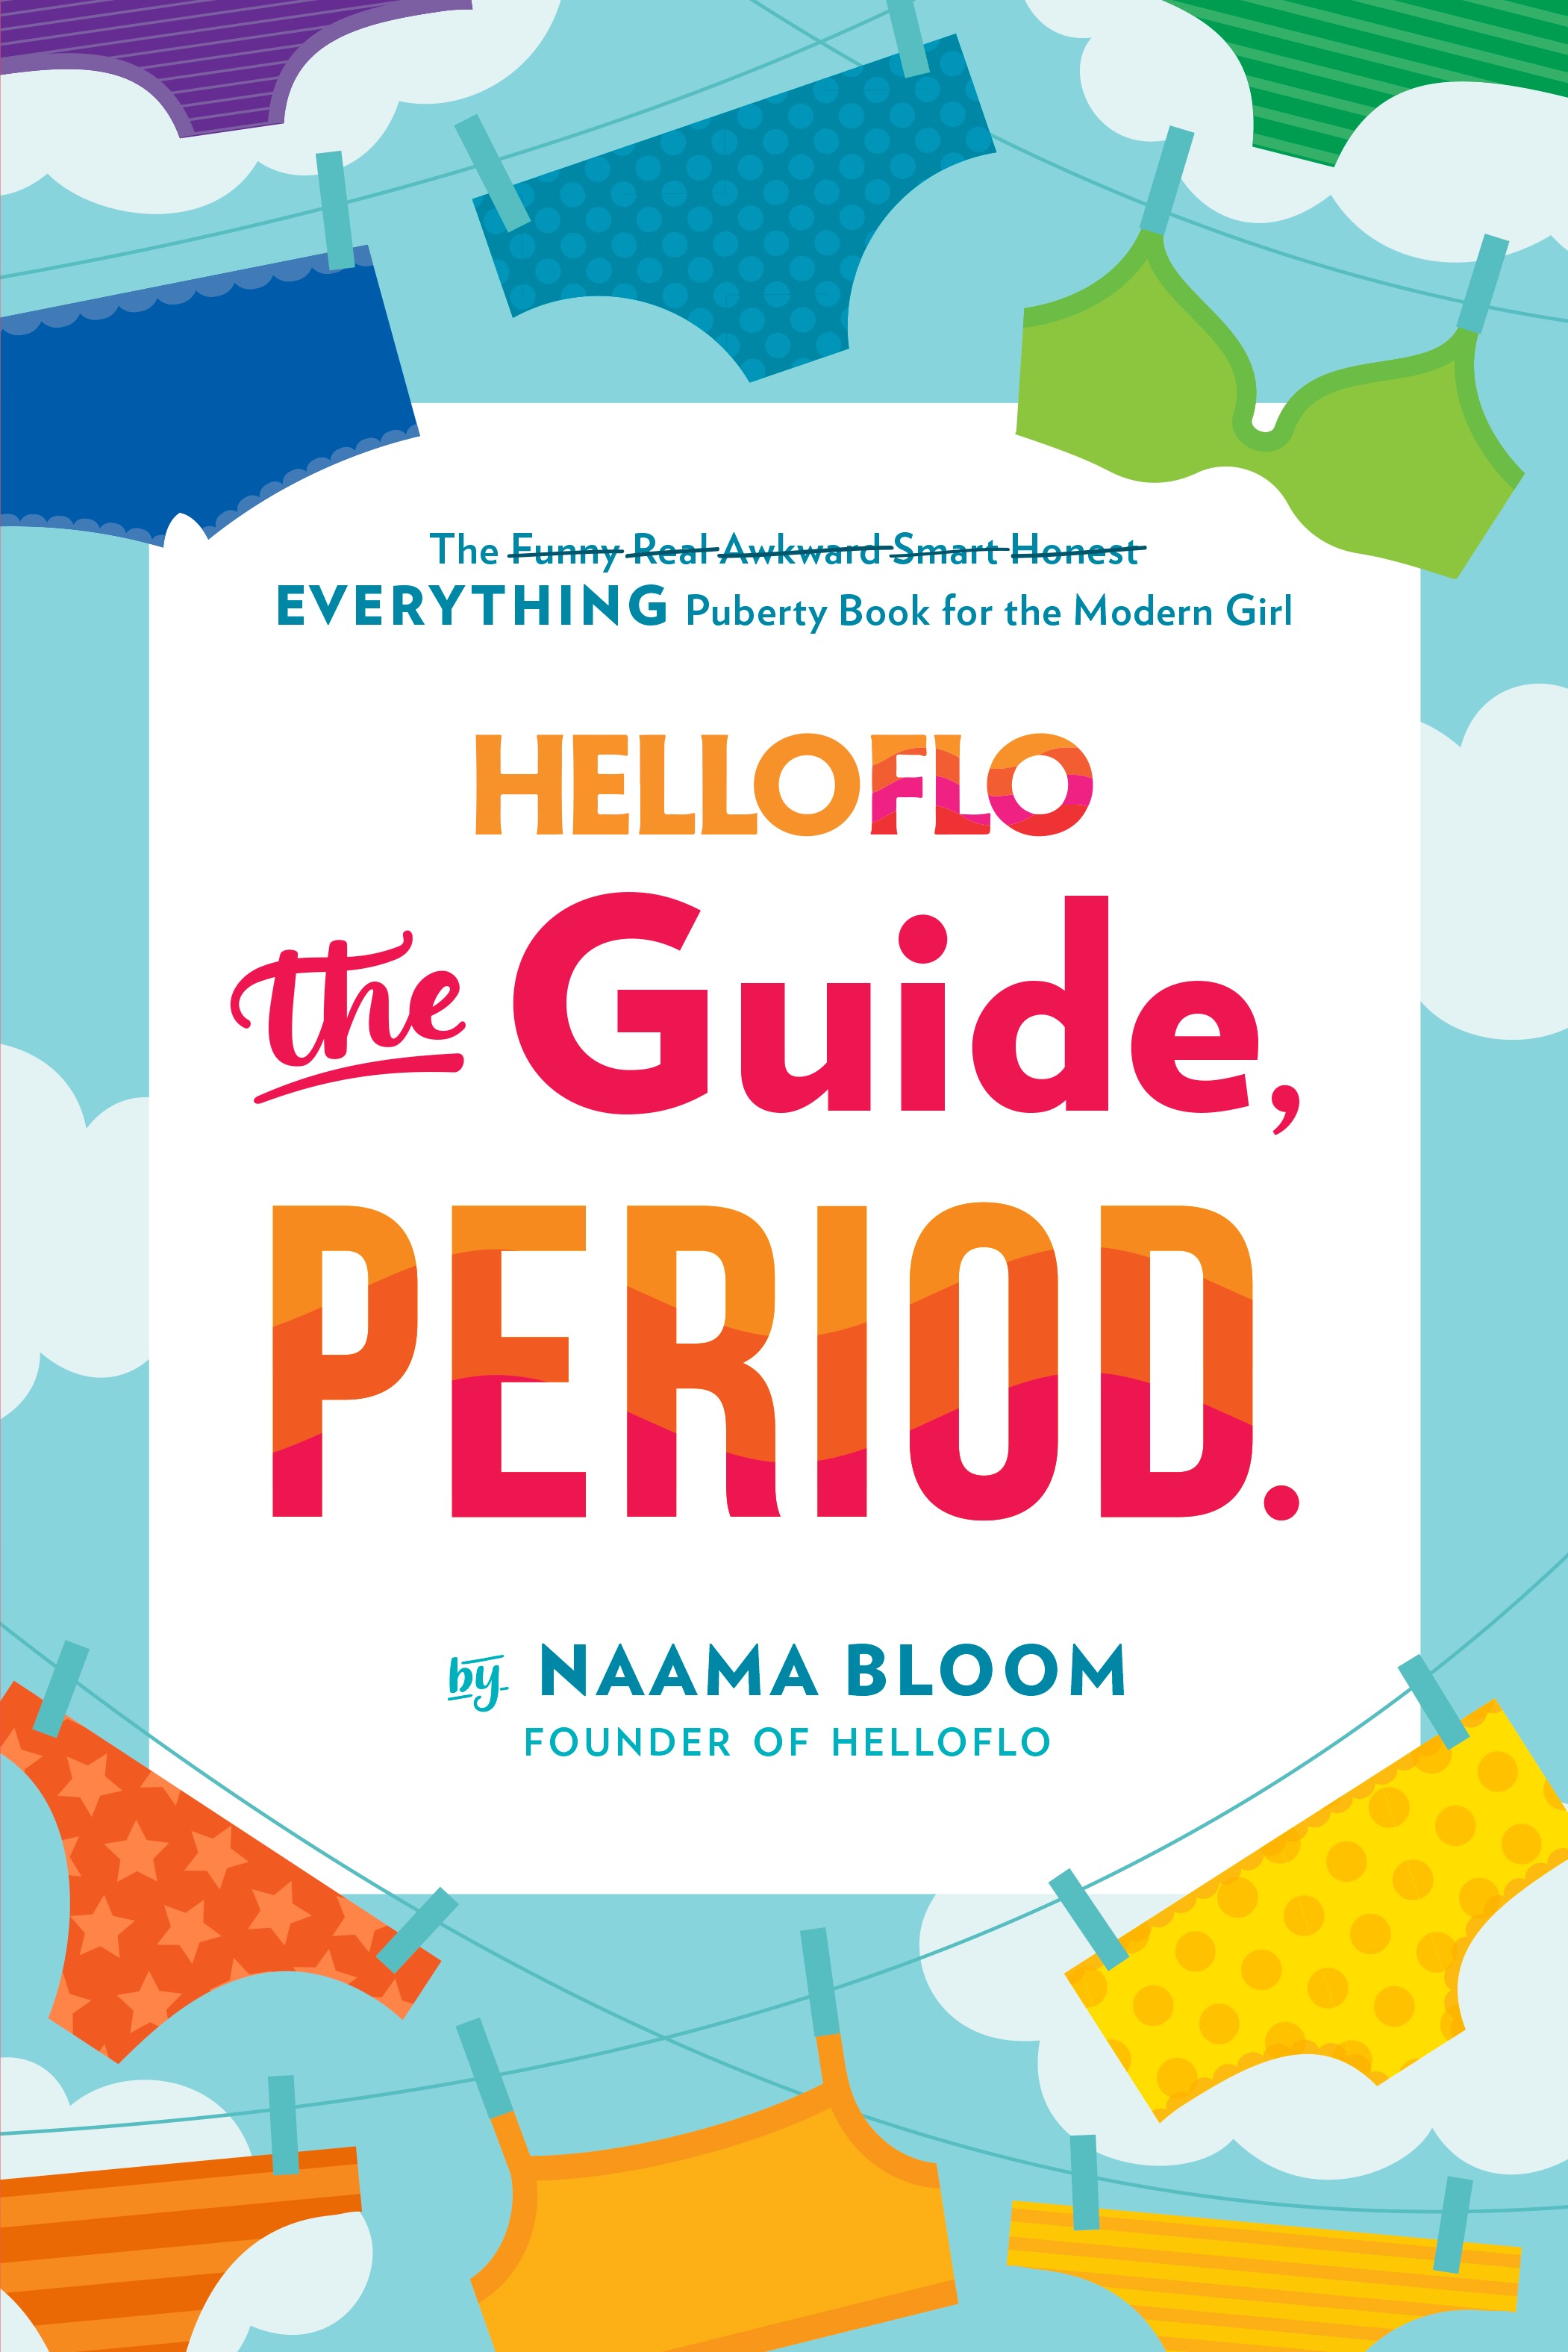 Book Launch: HELLOFLO: The Guide, Period. by Naama Bloom